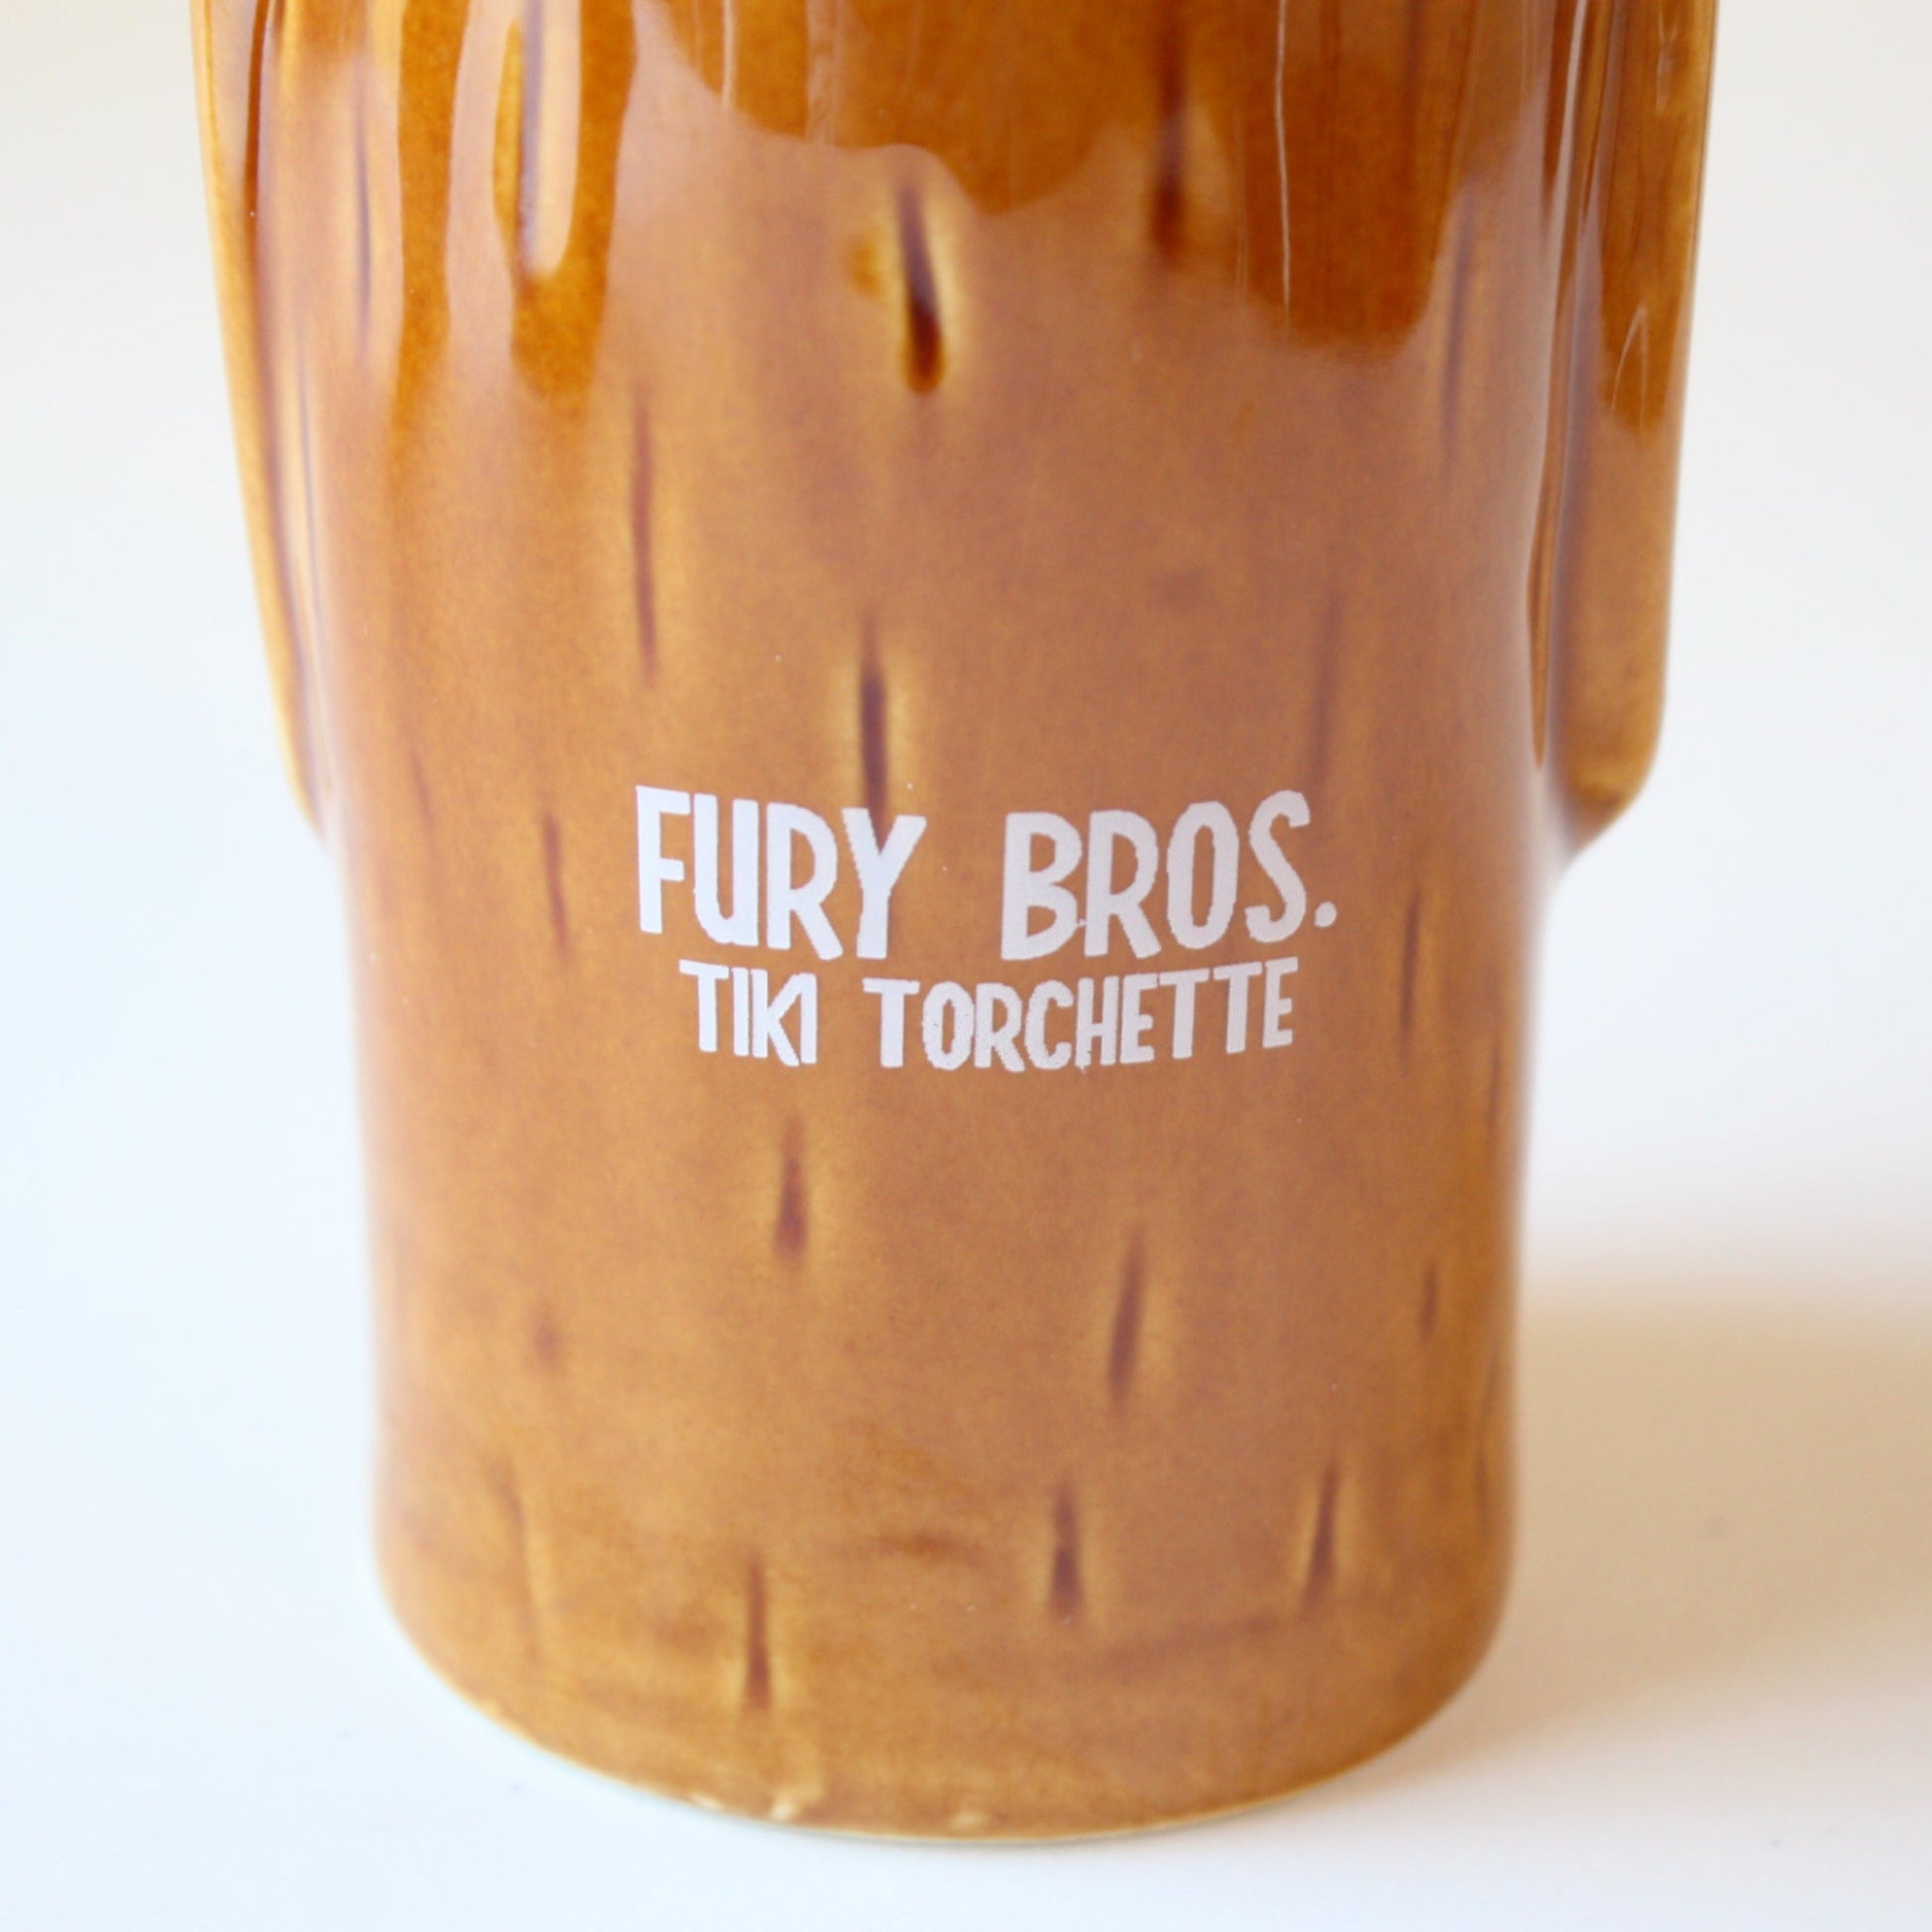 Fury Bros Tiki Torchette - Pele's Punch - Made in the USA